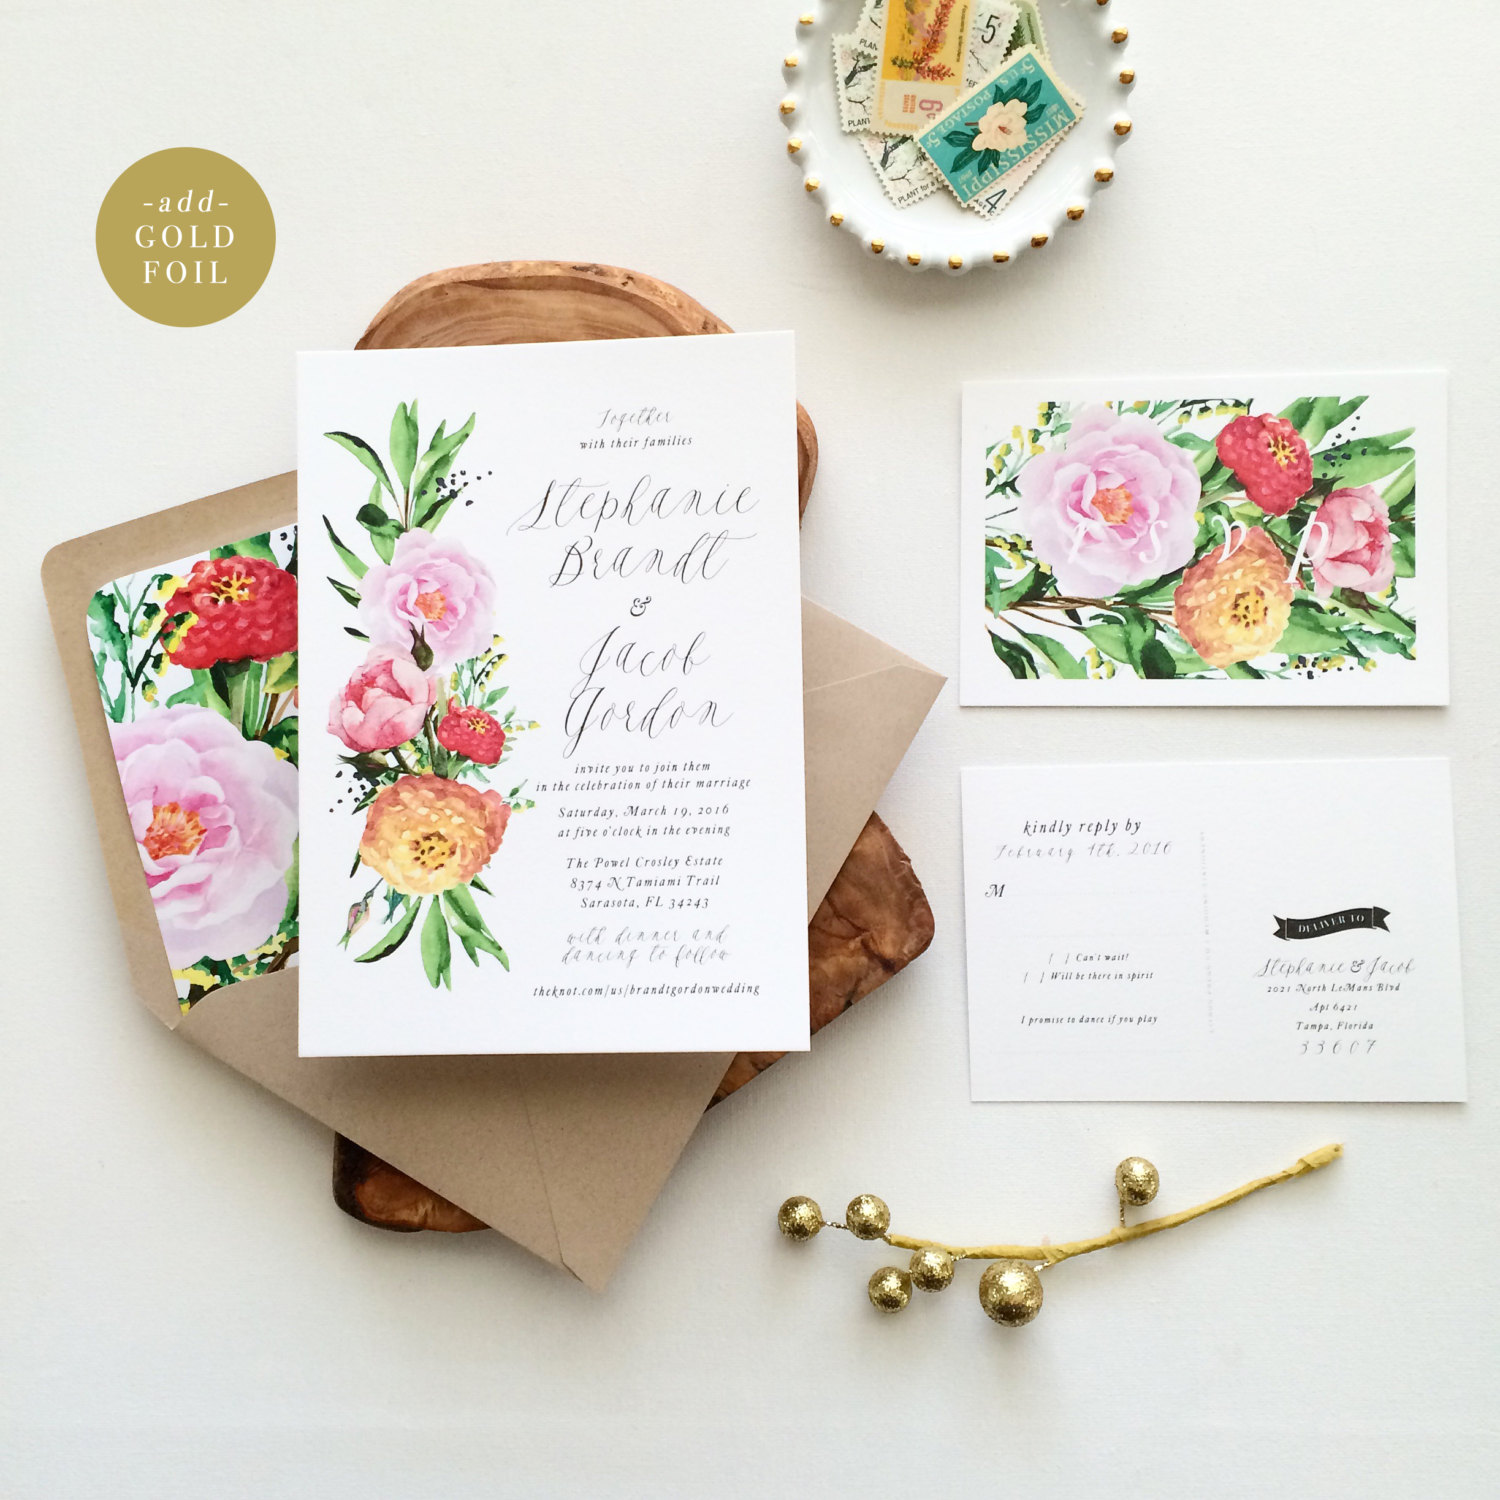 spring watercolor botanical wedding invitations | 6 Floral Botanical Invitations for Spring Weddings http://wp.me/p1g0if-yOx by Citrus Press Co.